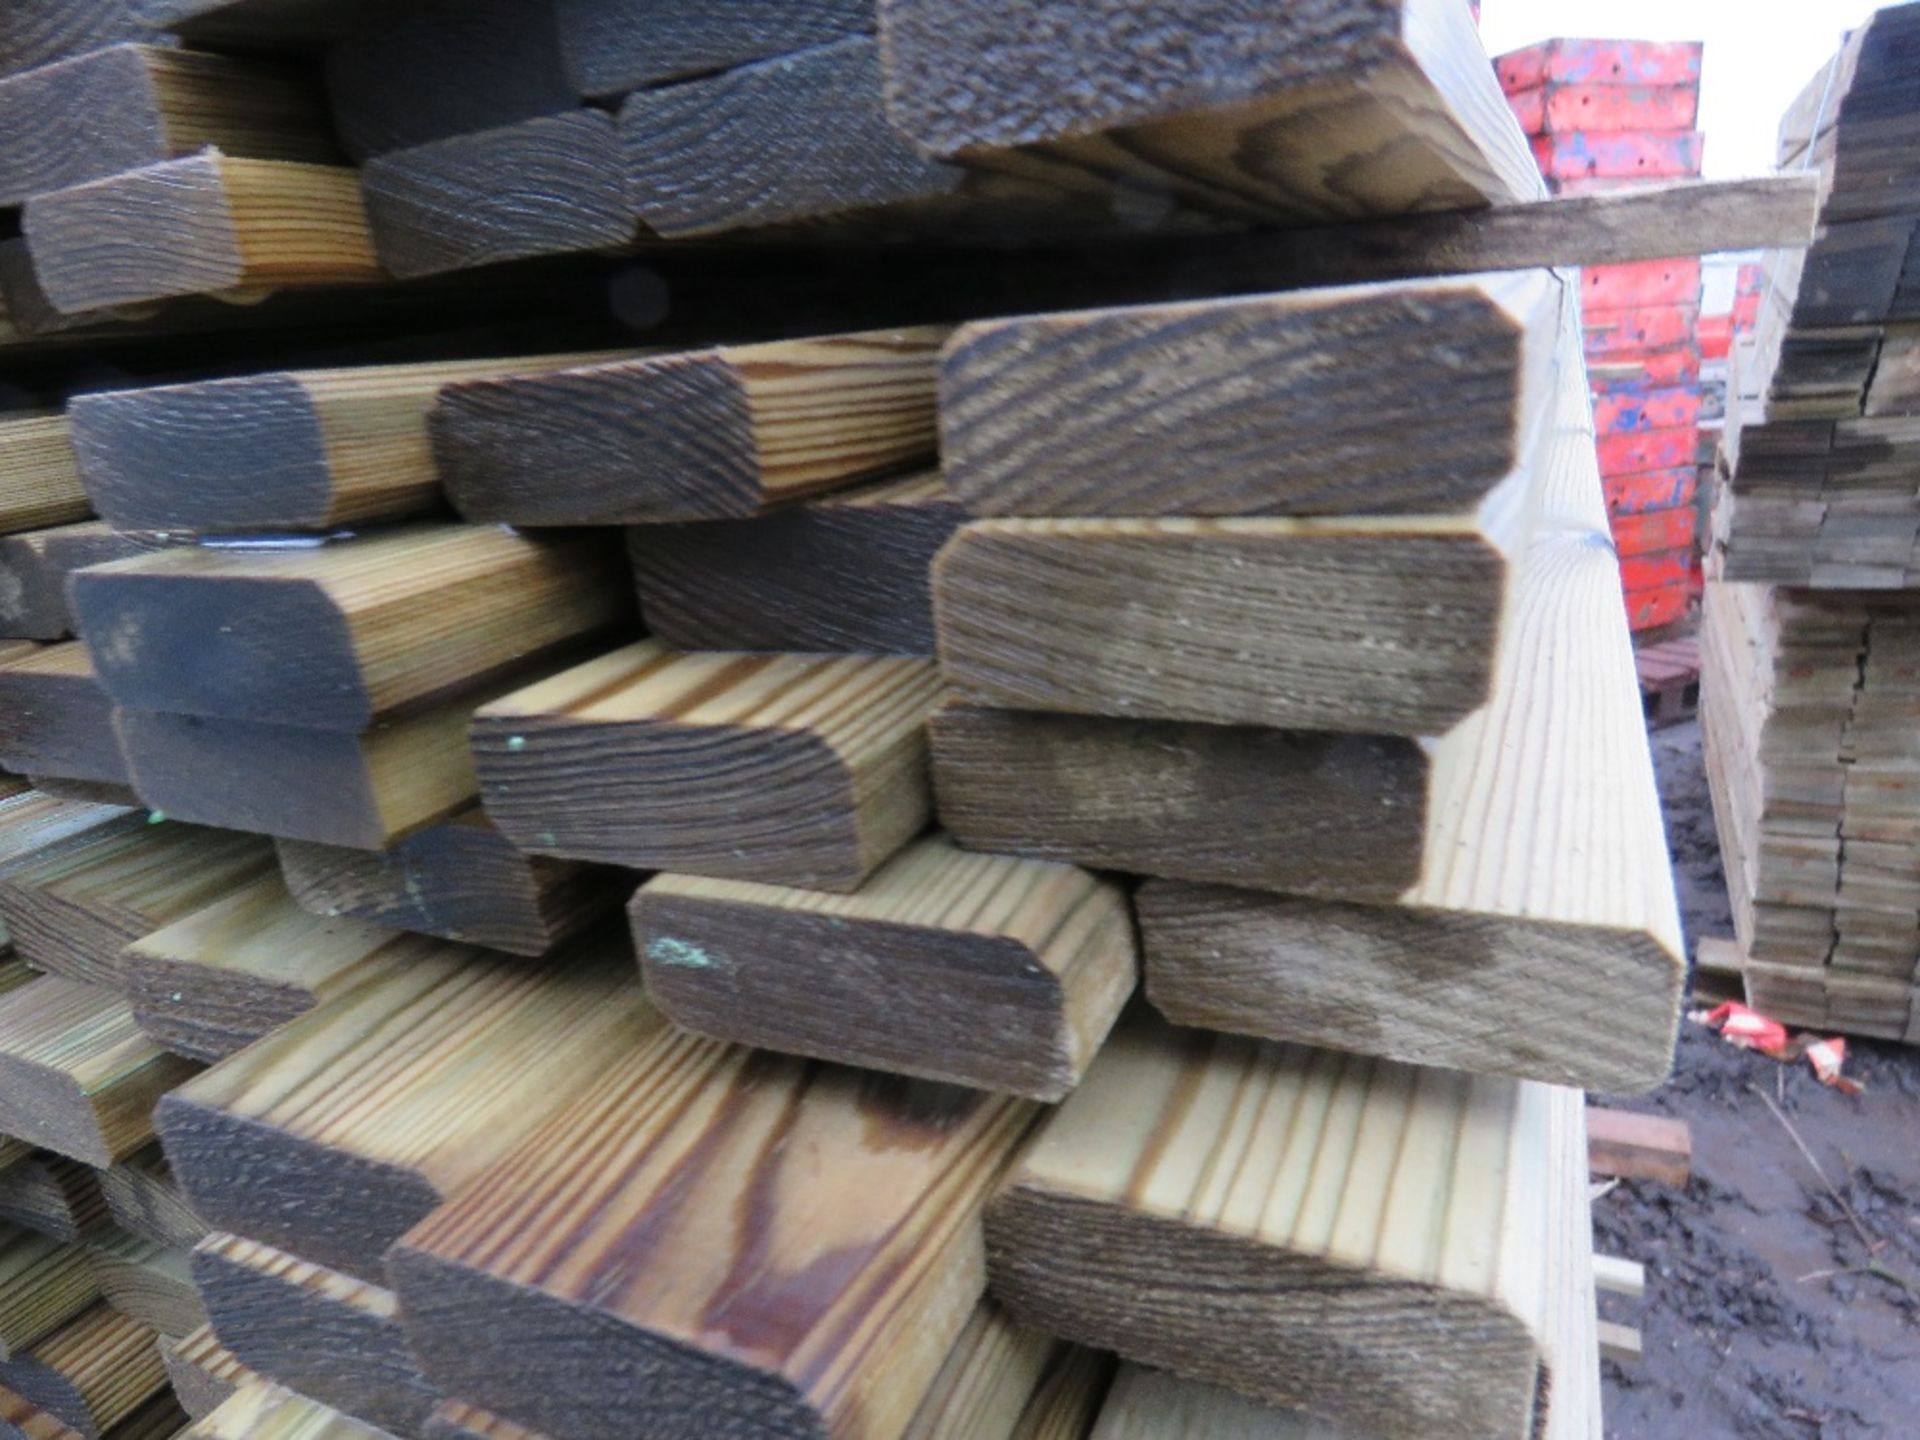 2 LARGE PACKS OF FENCING TIMBER/TRELLIS SLATS 1.83MX5CM APPROX. - Image 3 of 3